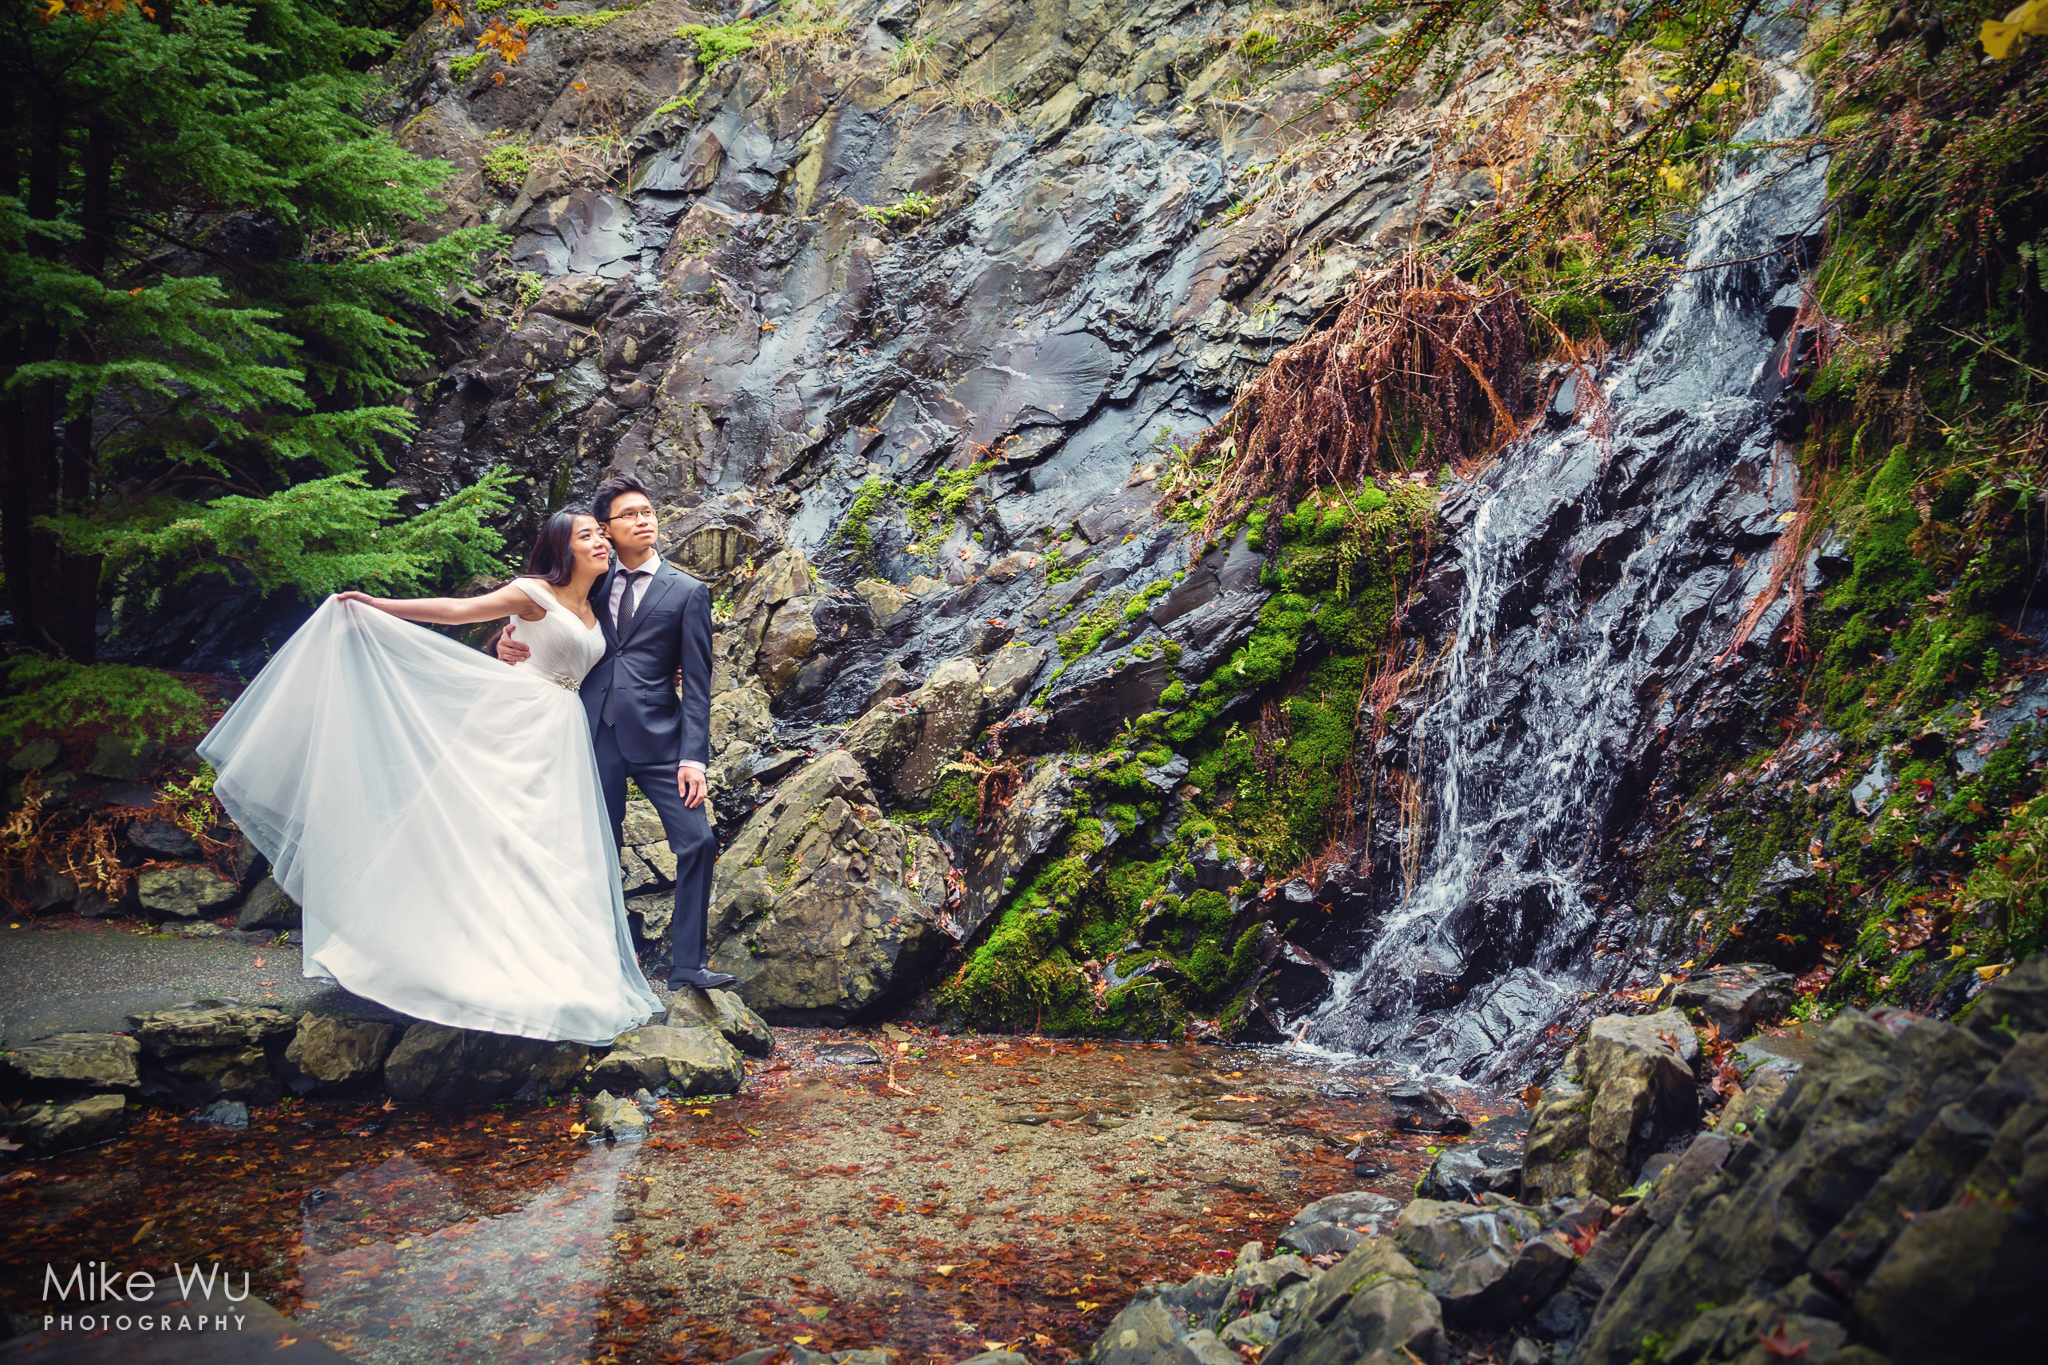 queen elizabeth park, couple, wedding, waterfall, water, reflection, nature, natural, engagement, photography, portrait, environmental, natural, nature, love, couple, loving, embrace, dress, asian